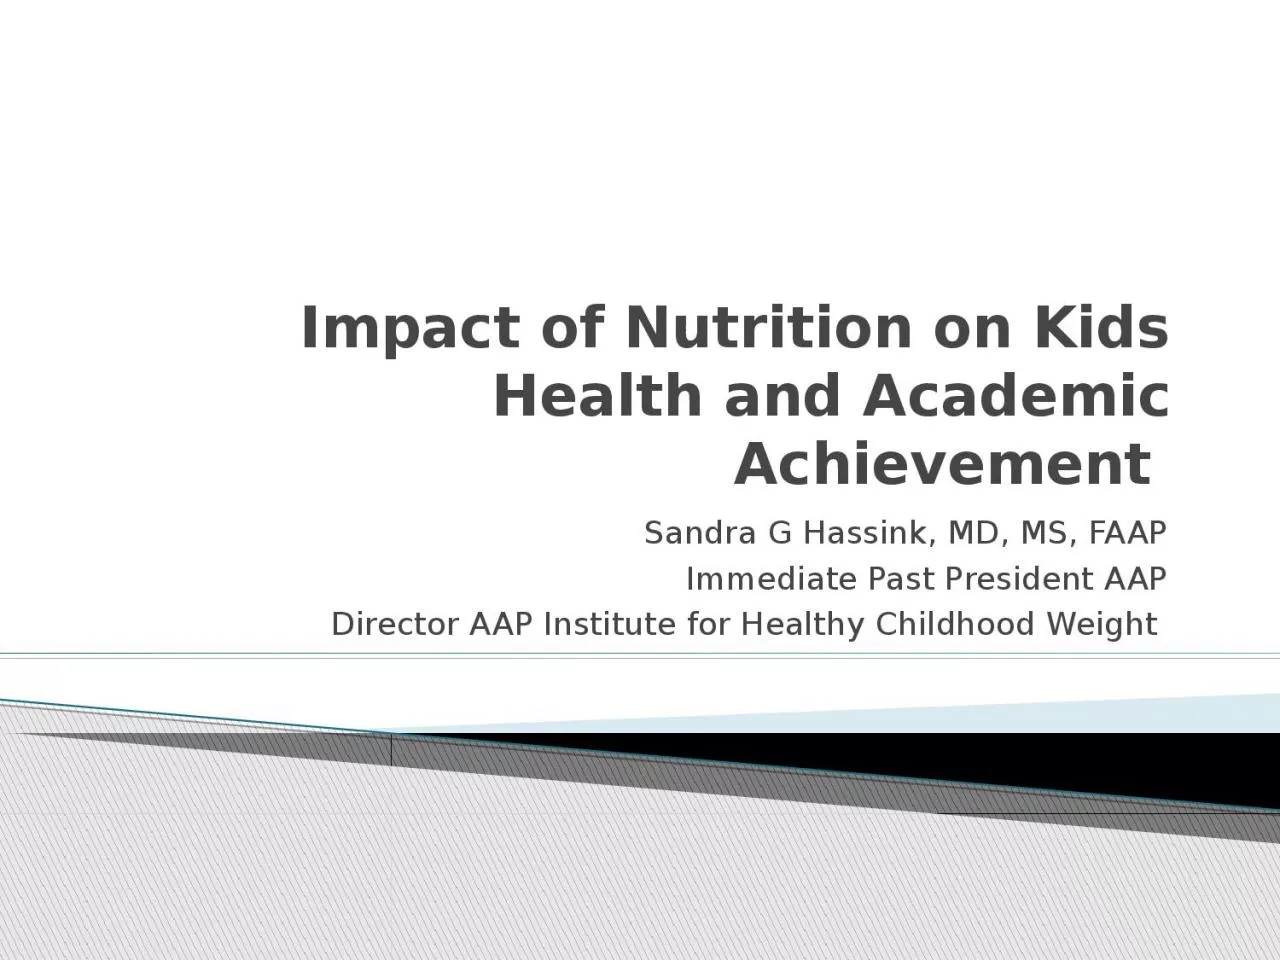 Impact of Nutrition on Kids Health and Academic Achievement